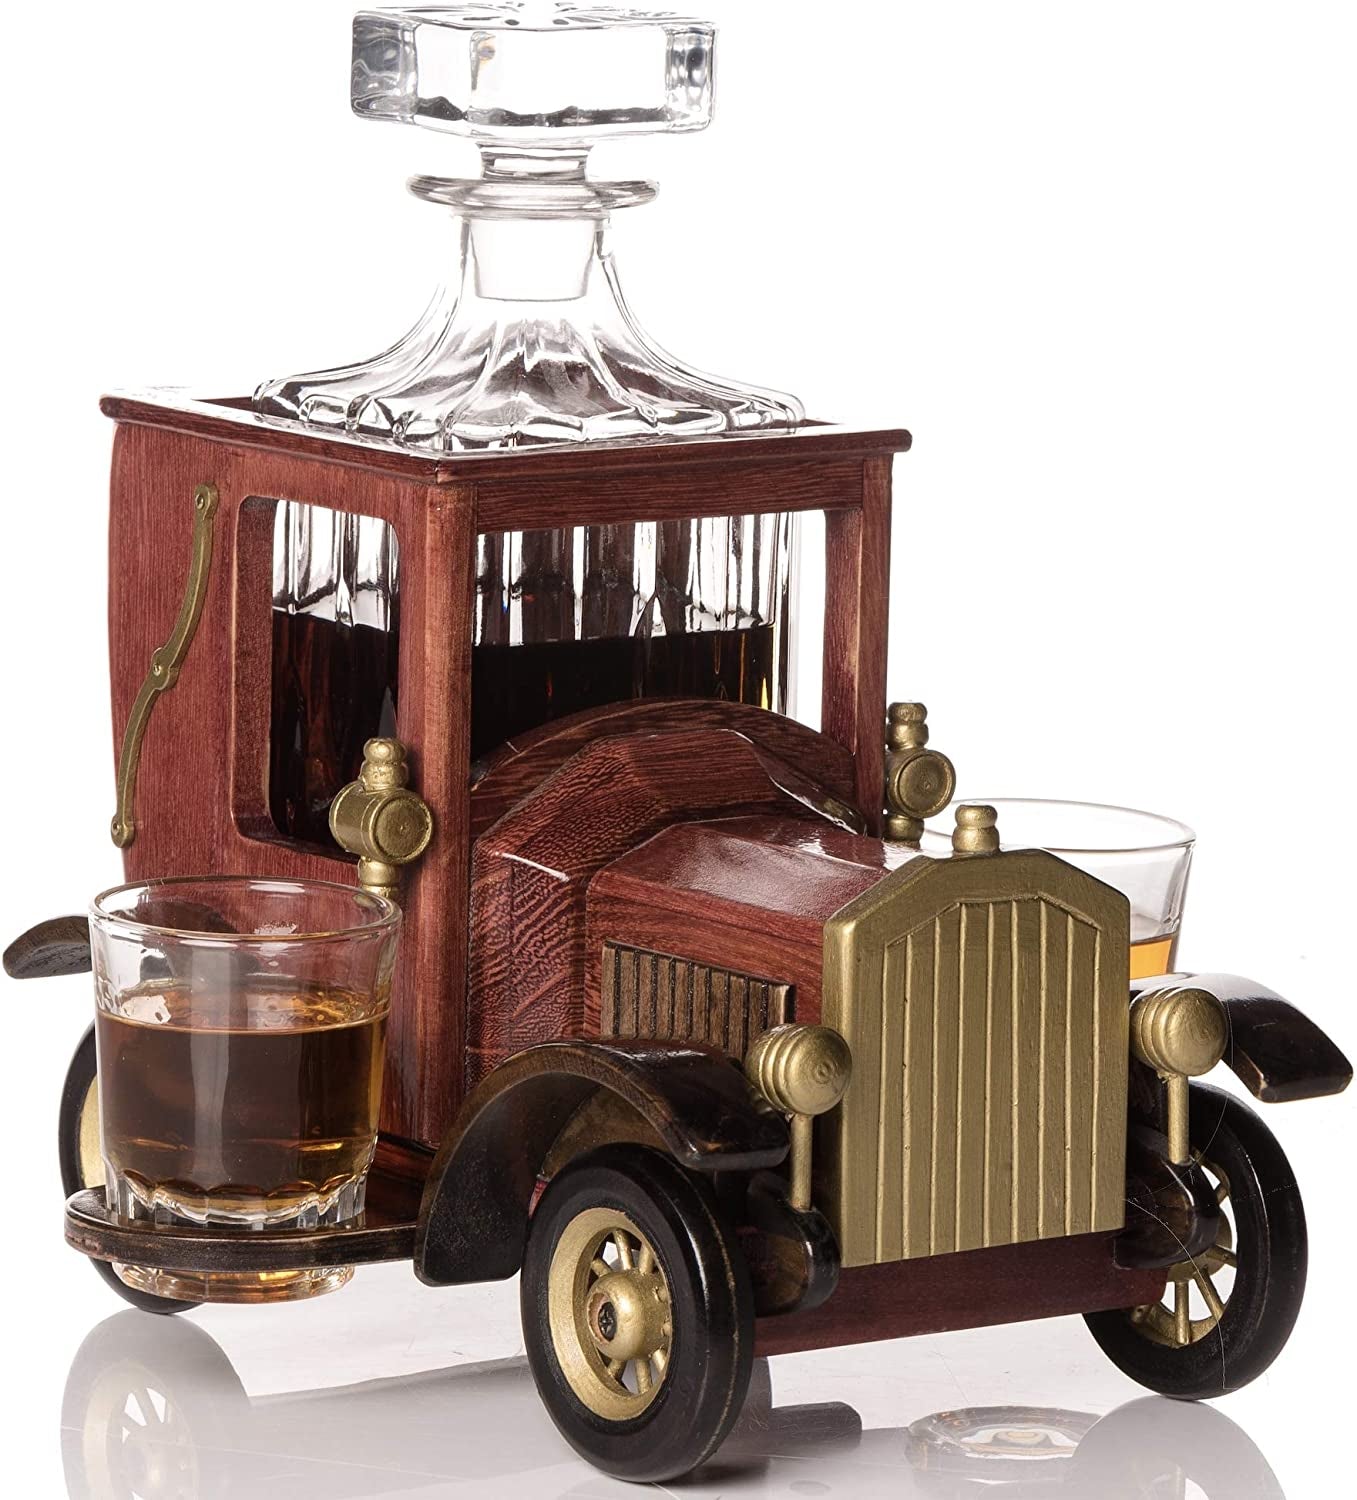 Whiskey Decanter Set with Glasses and Old Fashioned Vintage Car Stand - Bourbon Decanter Set with Glasses for Liquor, Vodka - Whiskey Gifts for Men - Liquor Decanter - Home Bar Accessories